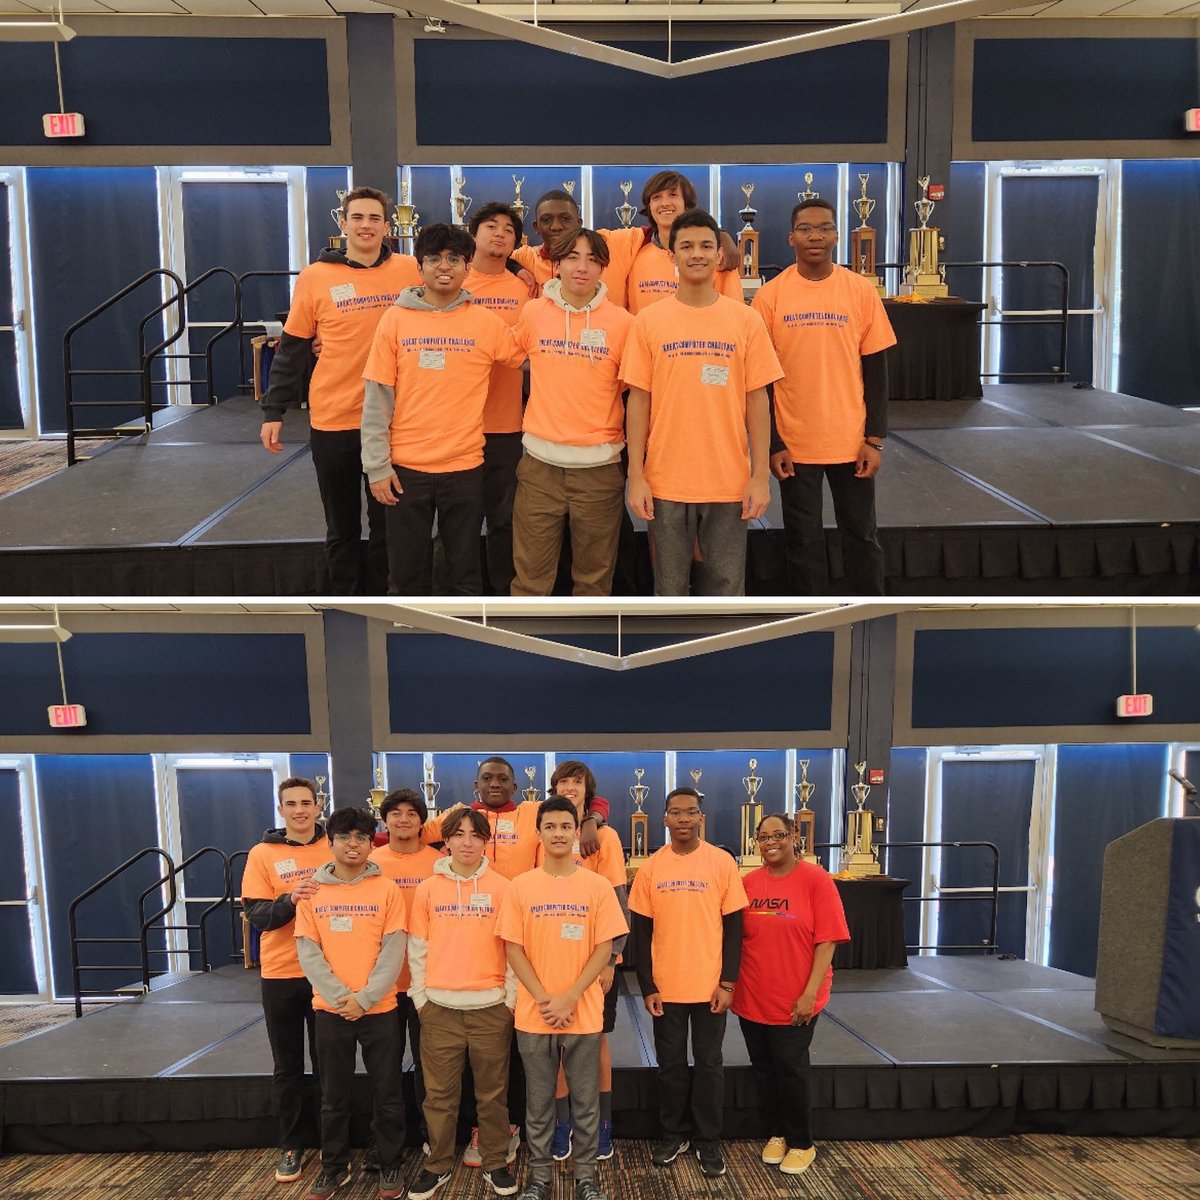 The @LandstownEagles attended the 39th Annual Great Computer Challenge @ODU. 🦅 earned 1st Place in Video Editing, 1st Place in Programming Object Oriented Business, 1st Place in Web Design, & an Honorable Mention in Cybersecurity. TY @cdmurchi for guiding the 🦅! #futureready